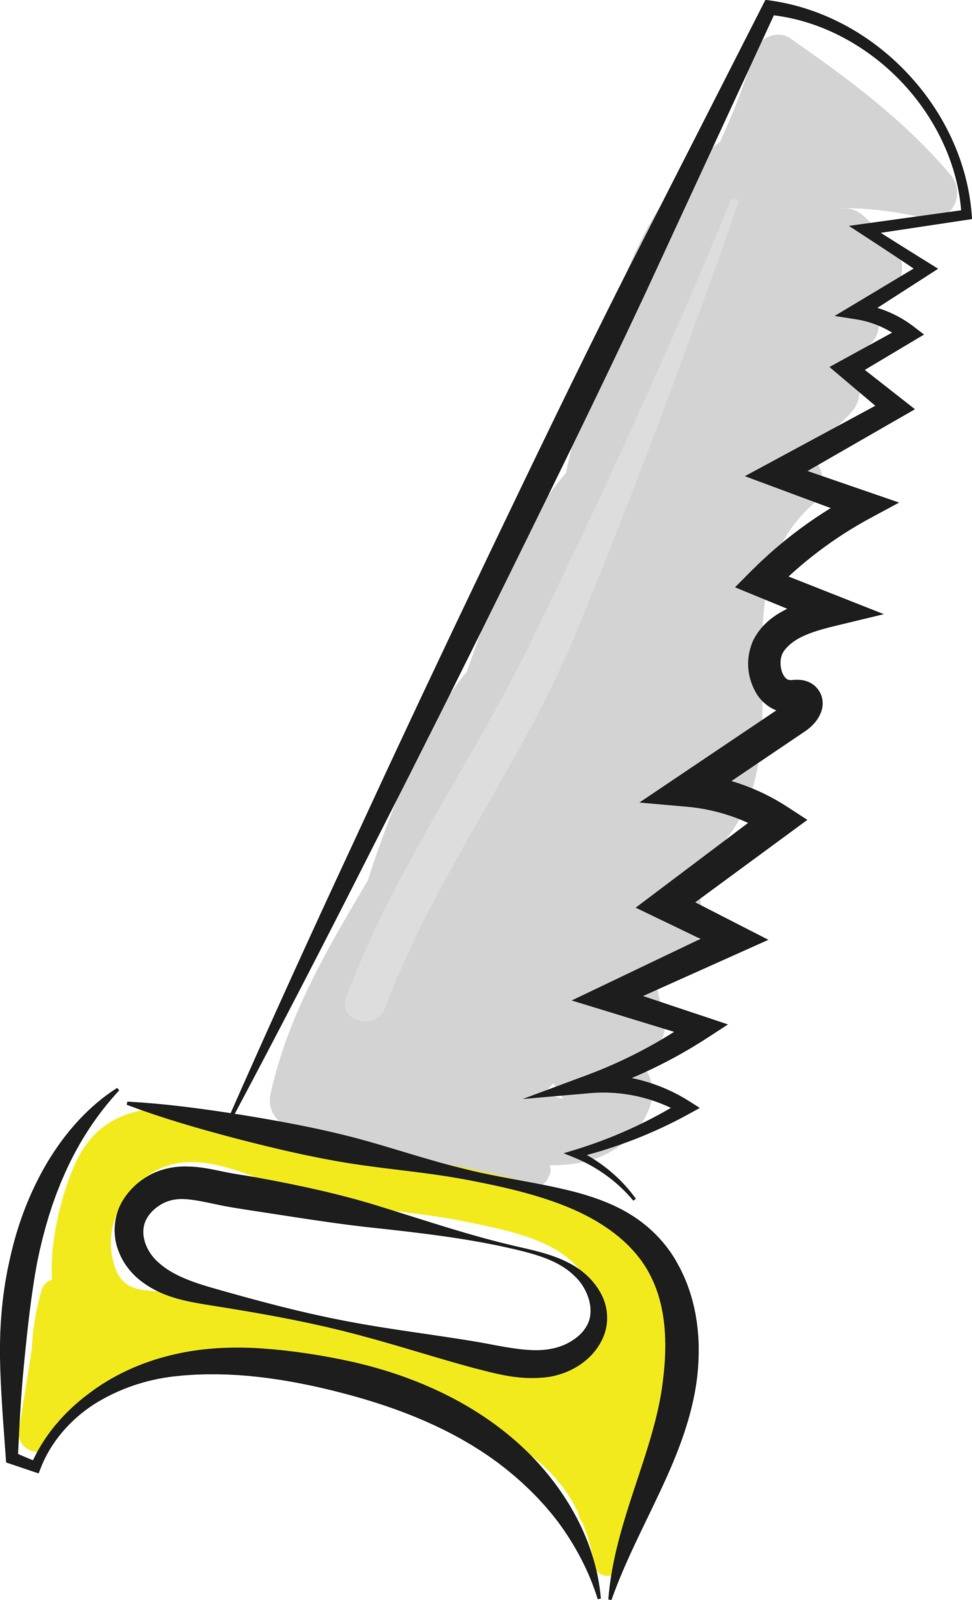 A sharp silver saw with yellow handle vector color drawing or illustration